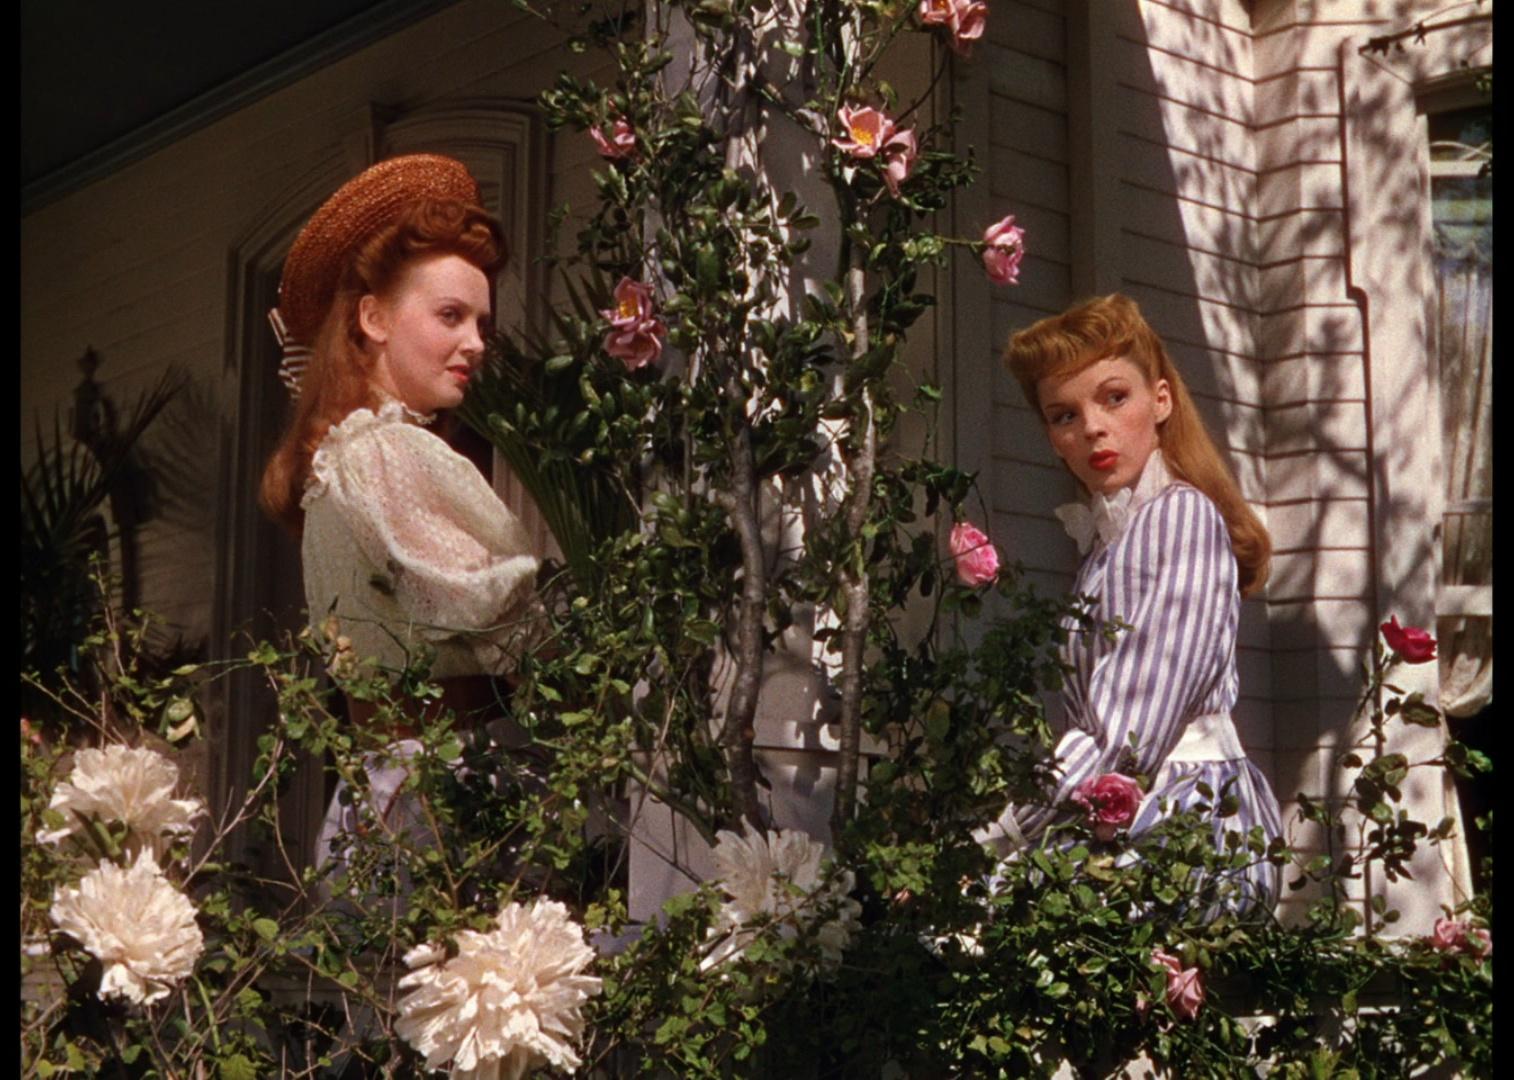 Judy Garland and another woman on the porch of a house peeking around a blooming vine.